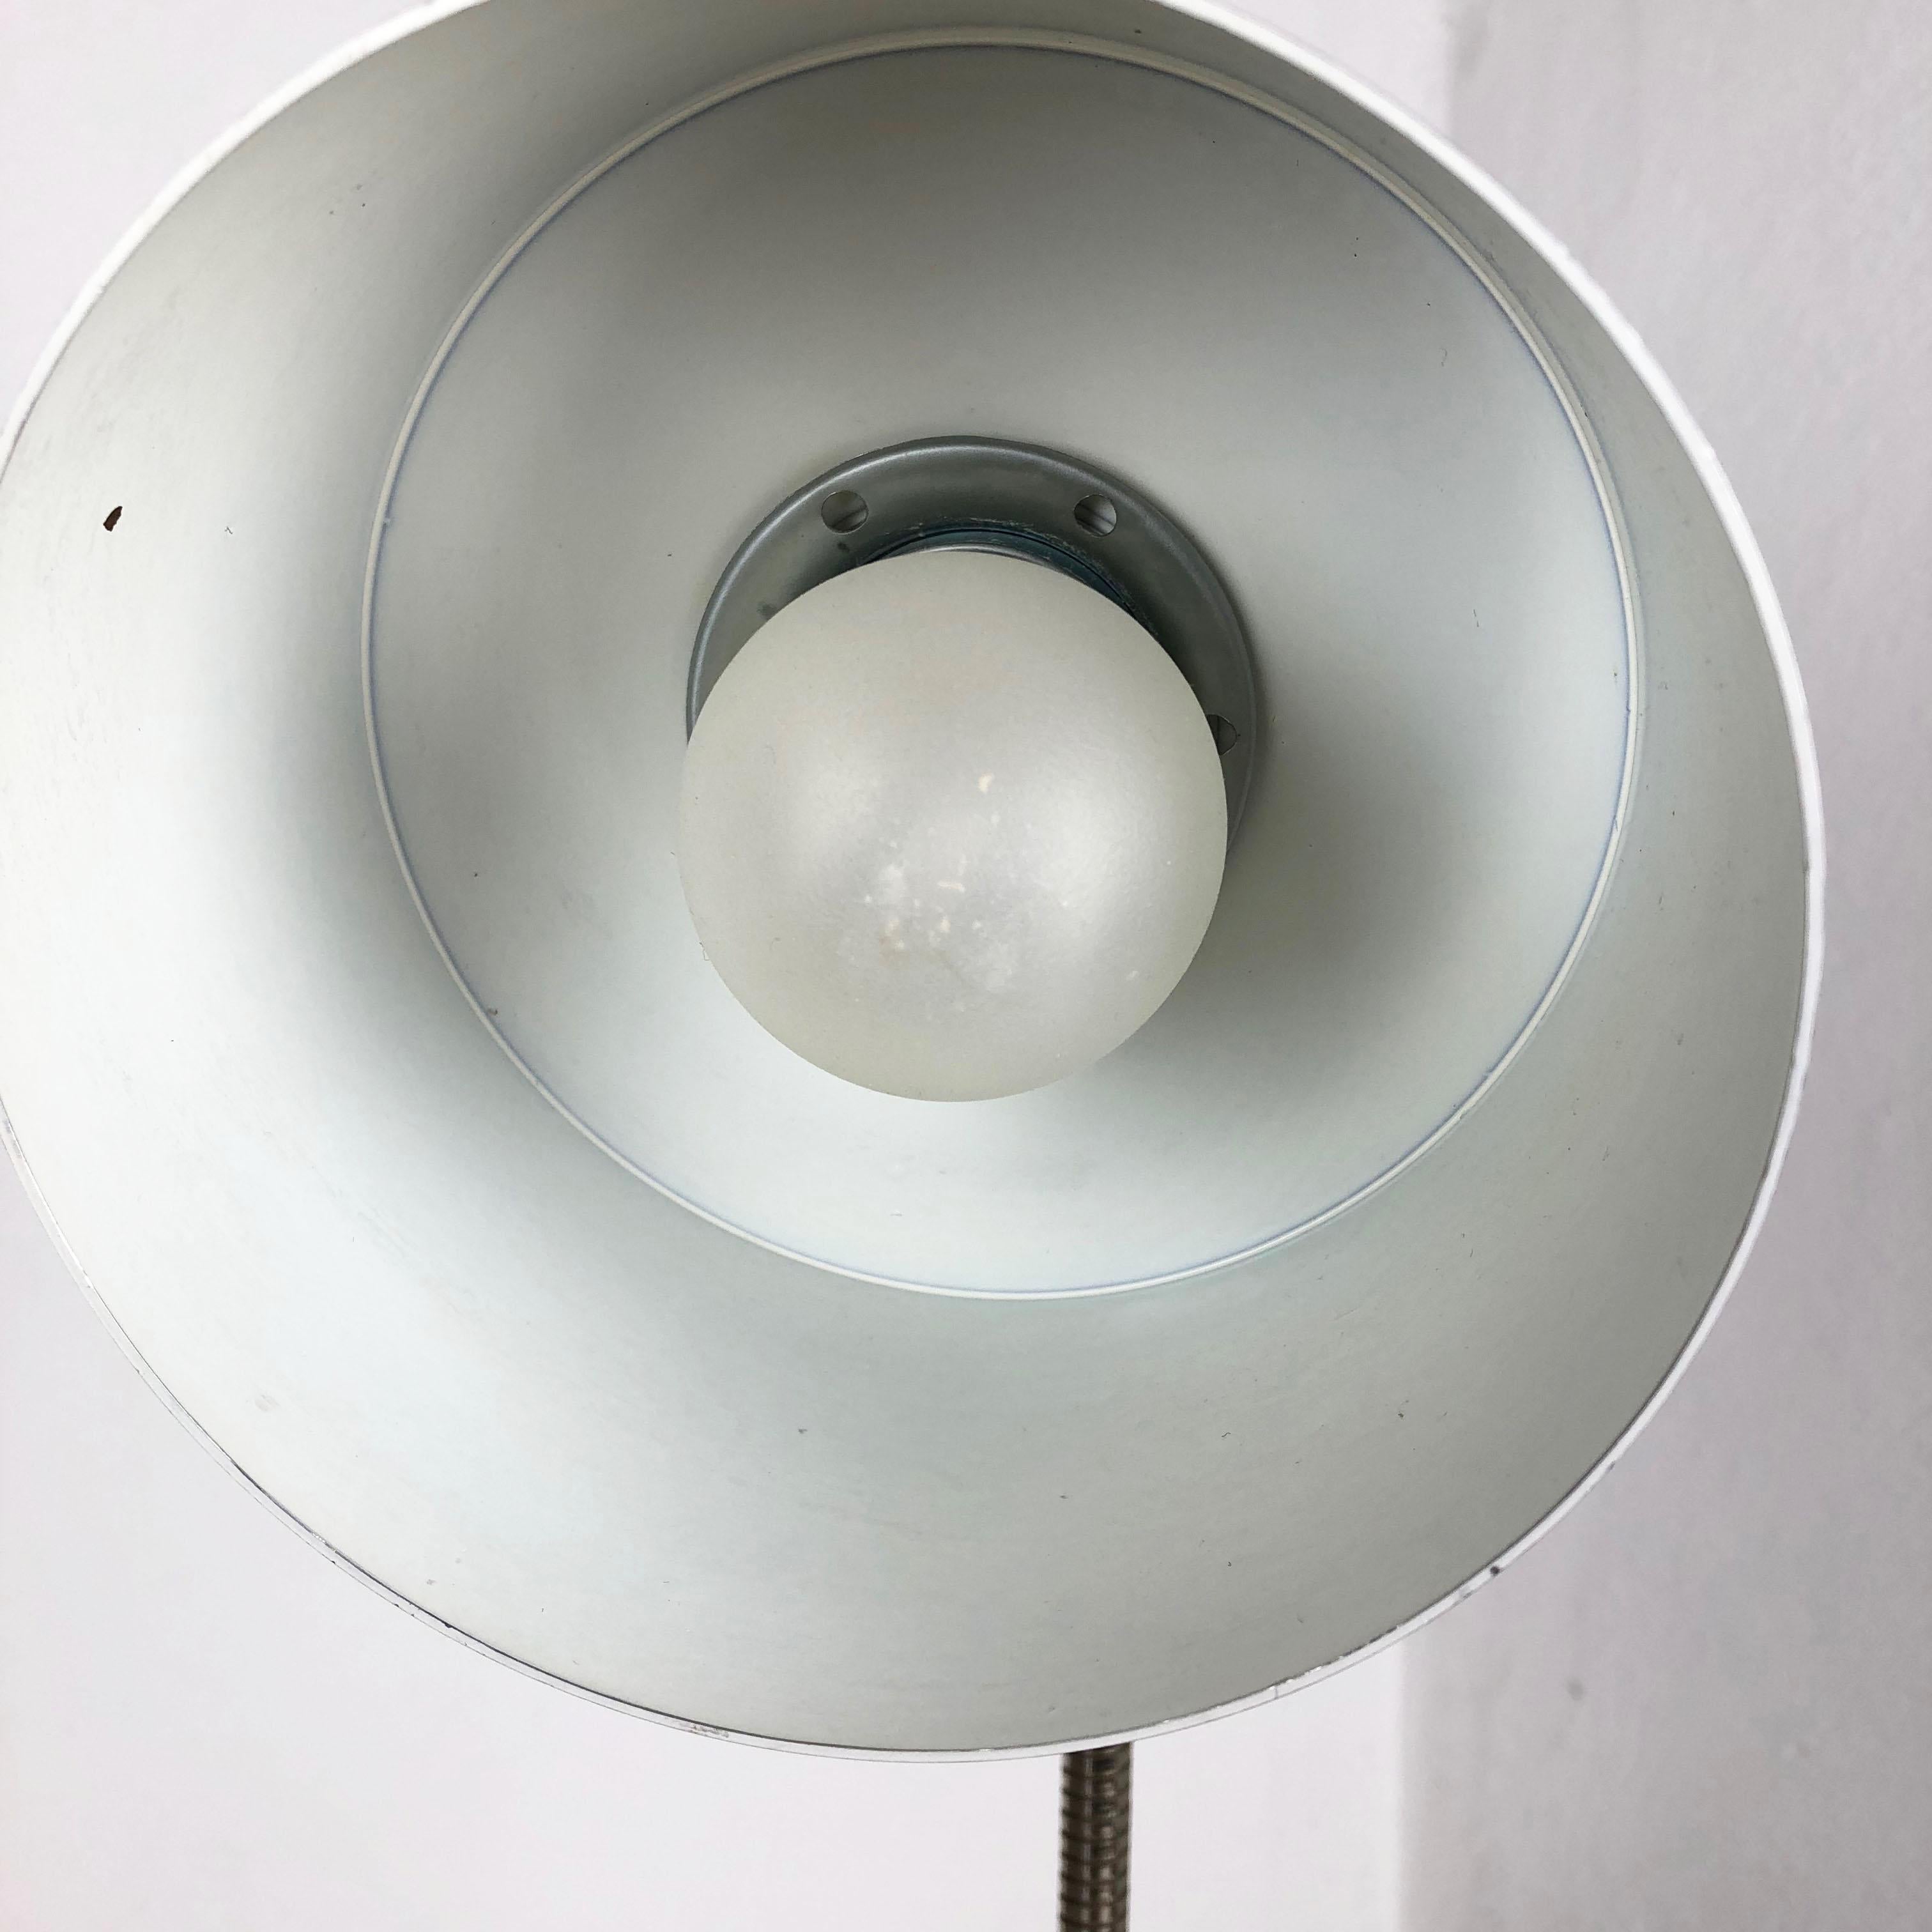 Original Modernist 1960s Metal Table Light Made by SIS Lights Attrib., Germany For Sale 7